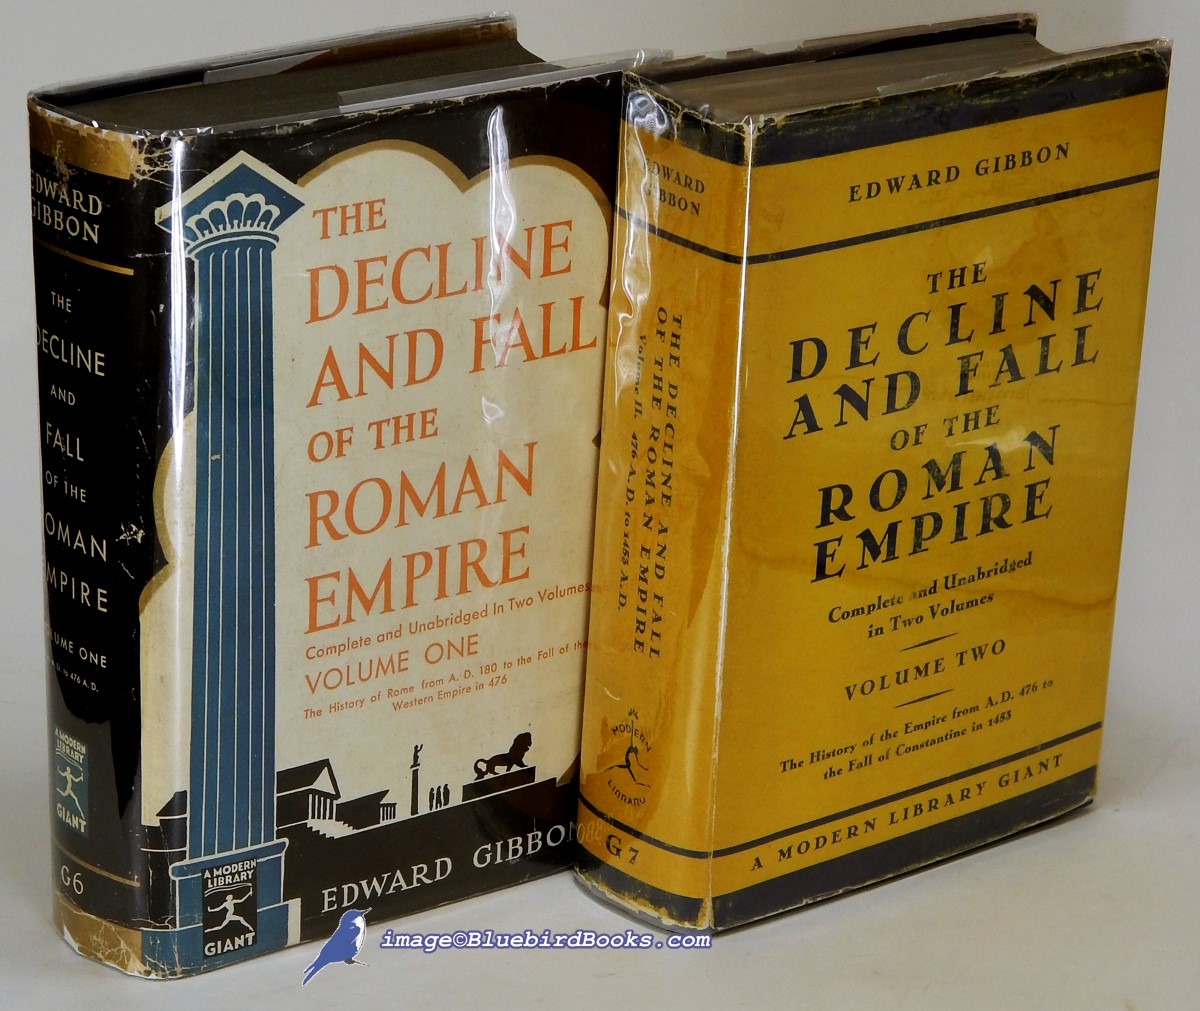 Image for The Decline and Fall of the Roman Empire: Complete and Unabridged in Two Volumes   (Mixed Modern Library Giant Set: G6.1, G7.1)